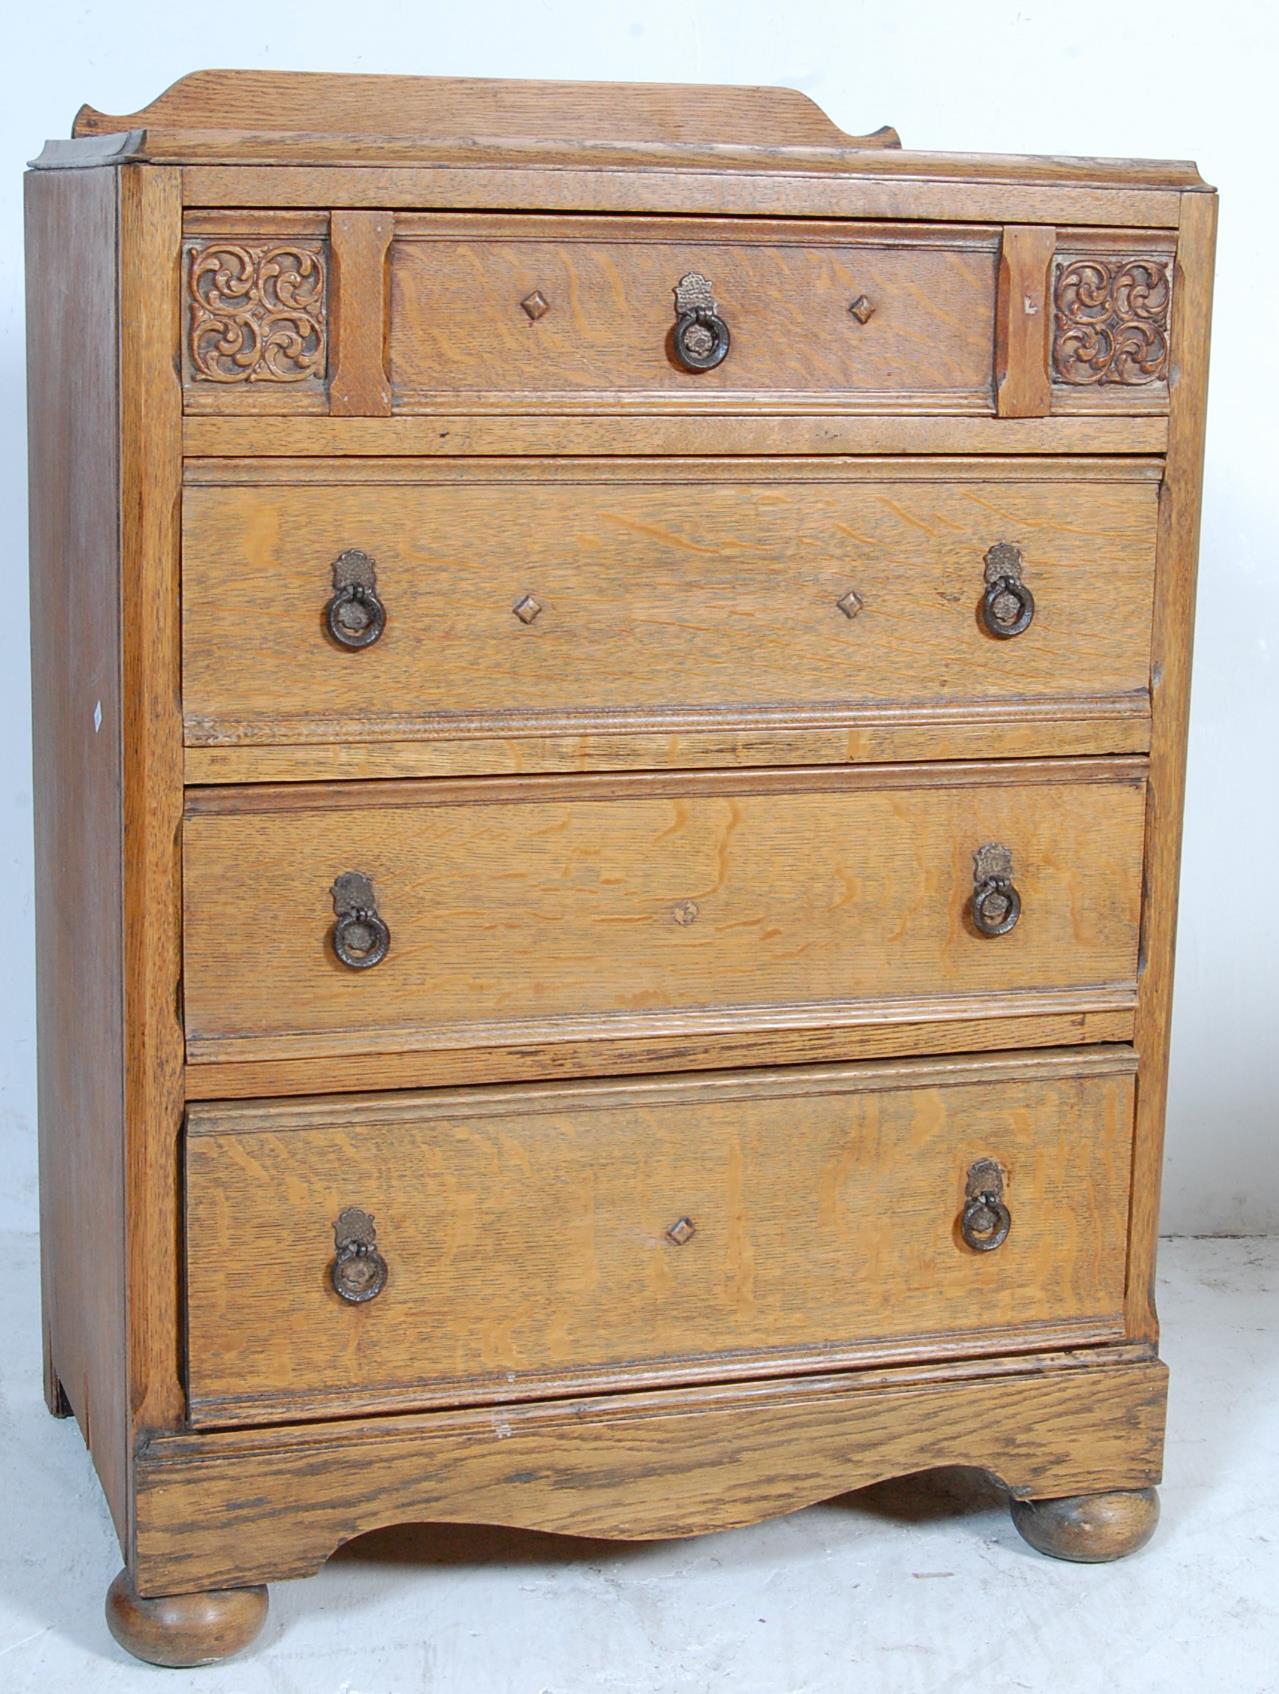 1930S OAK PEDESTAL CHEST OF DRAWERS